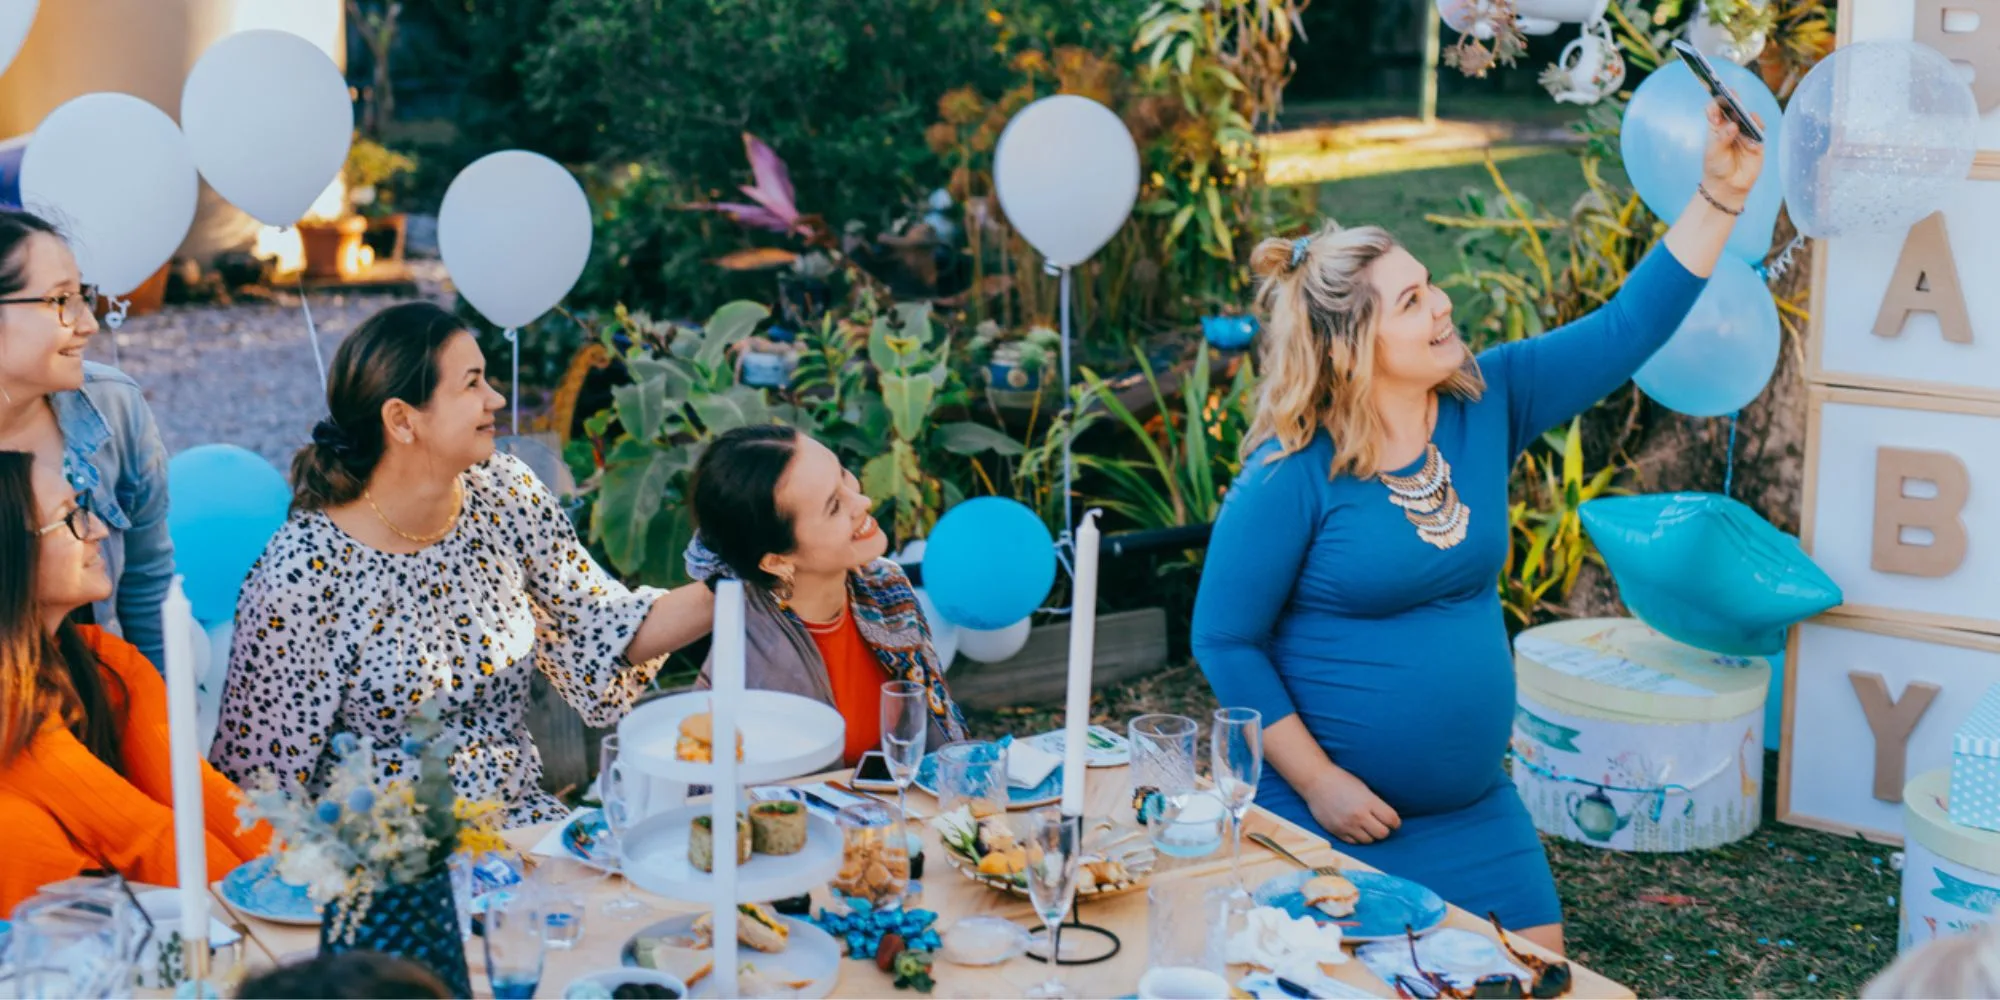 Woman celebrates her baby shower in the garden with friends